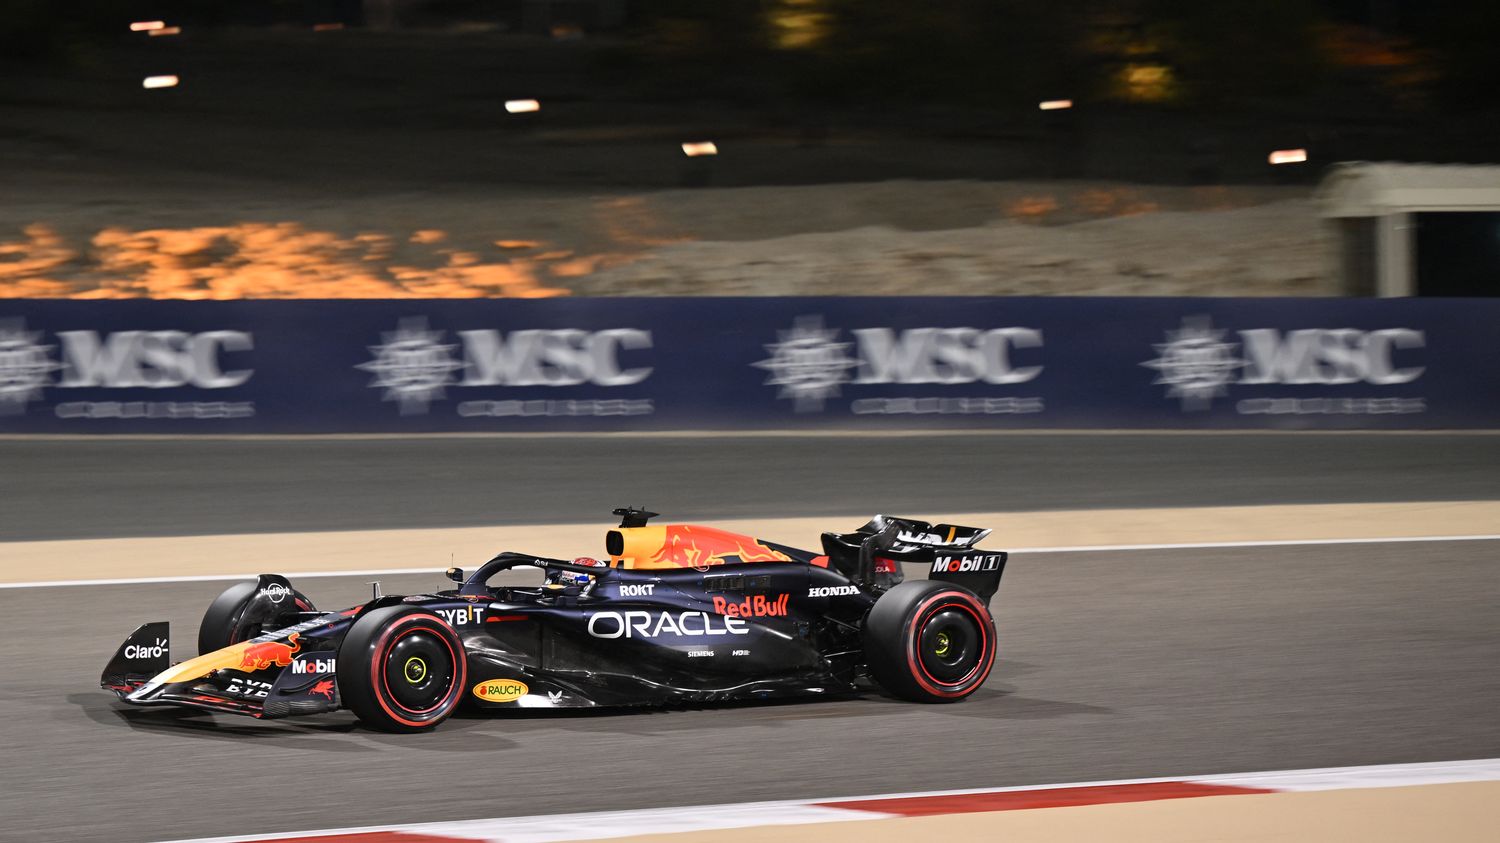 F1: Max Verstappen takes pole position in Bahrain, Pierre Gasly and Esteban Ocon at the back of the grid